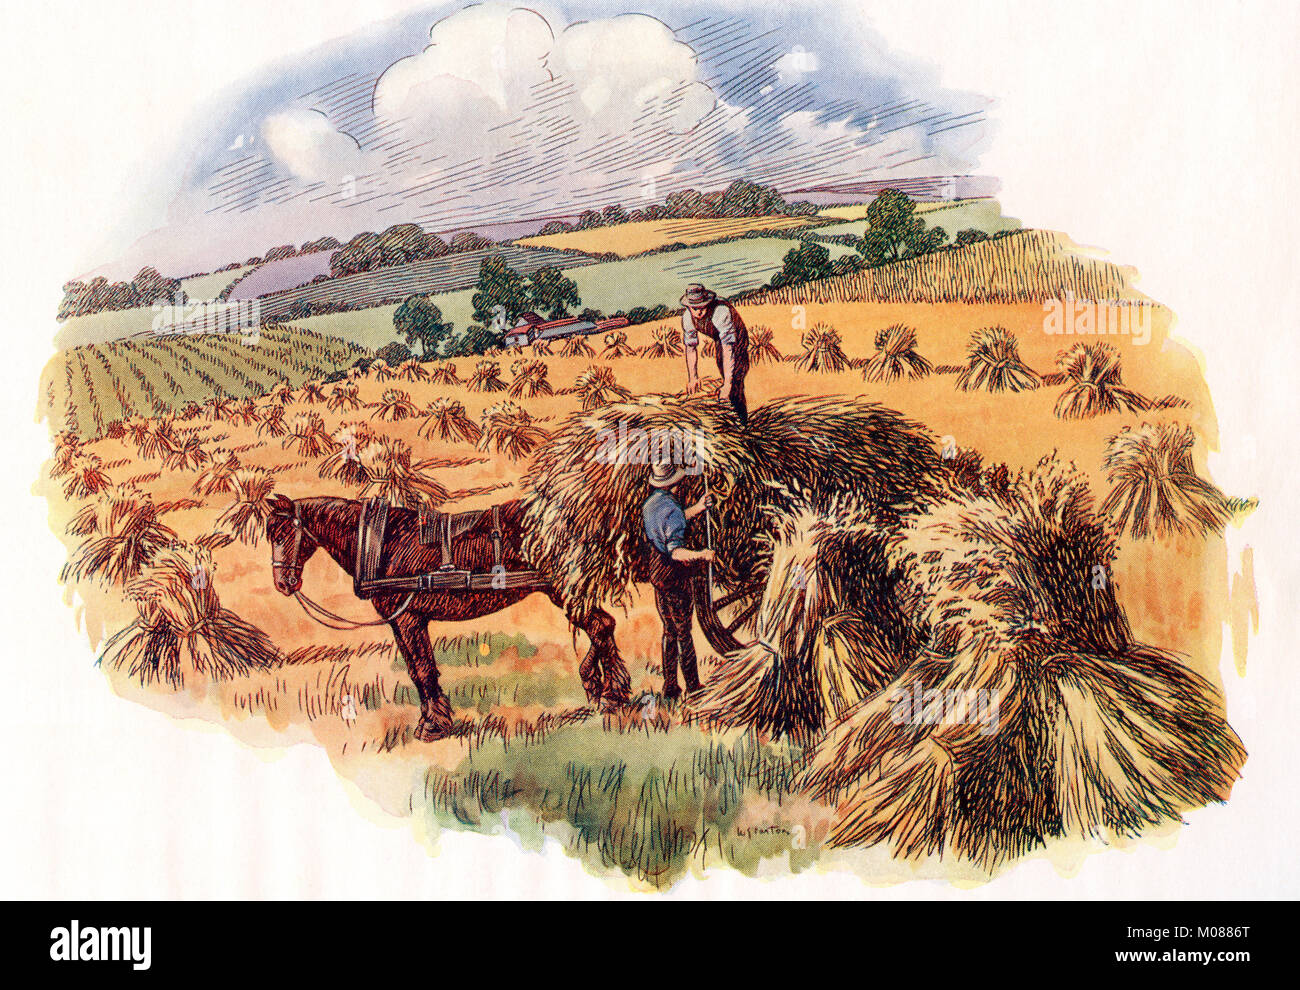 Harvesting at Tolpuddle, Dorset, England in the 19th century.  From The Martyrs of Tolpuddle, published 1934. Stock Photo